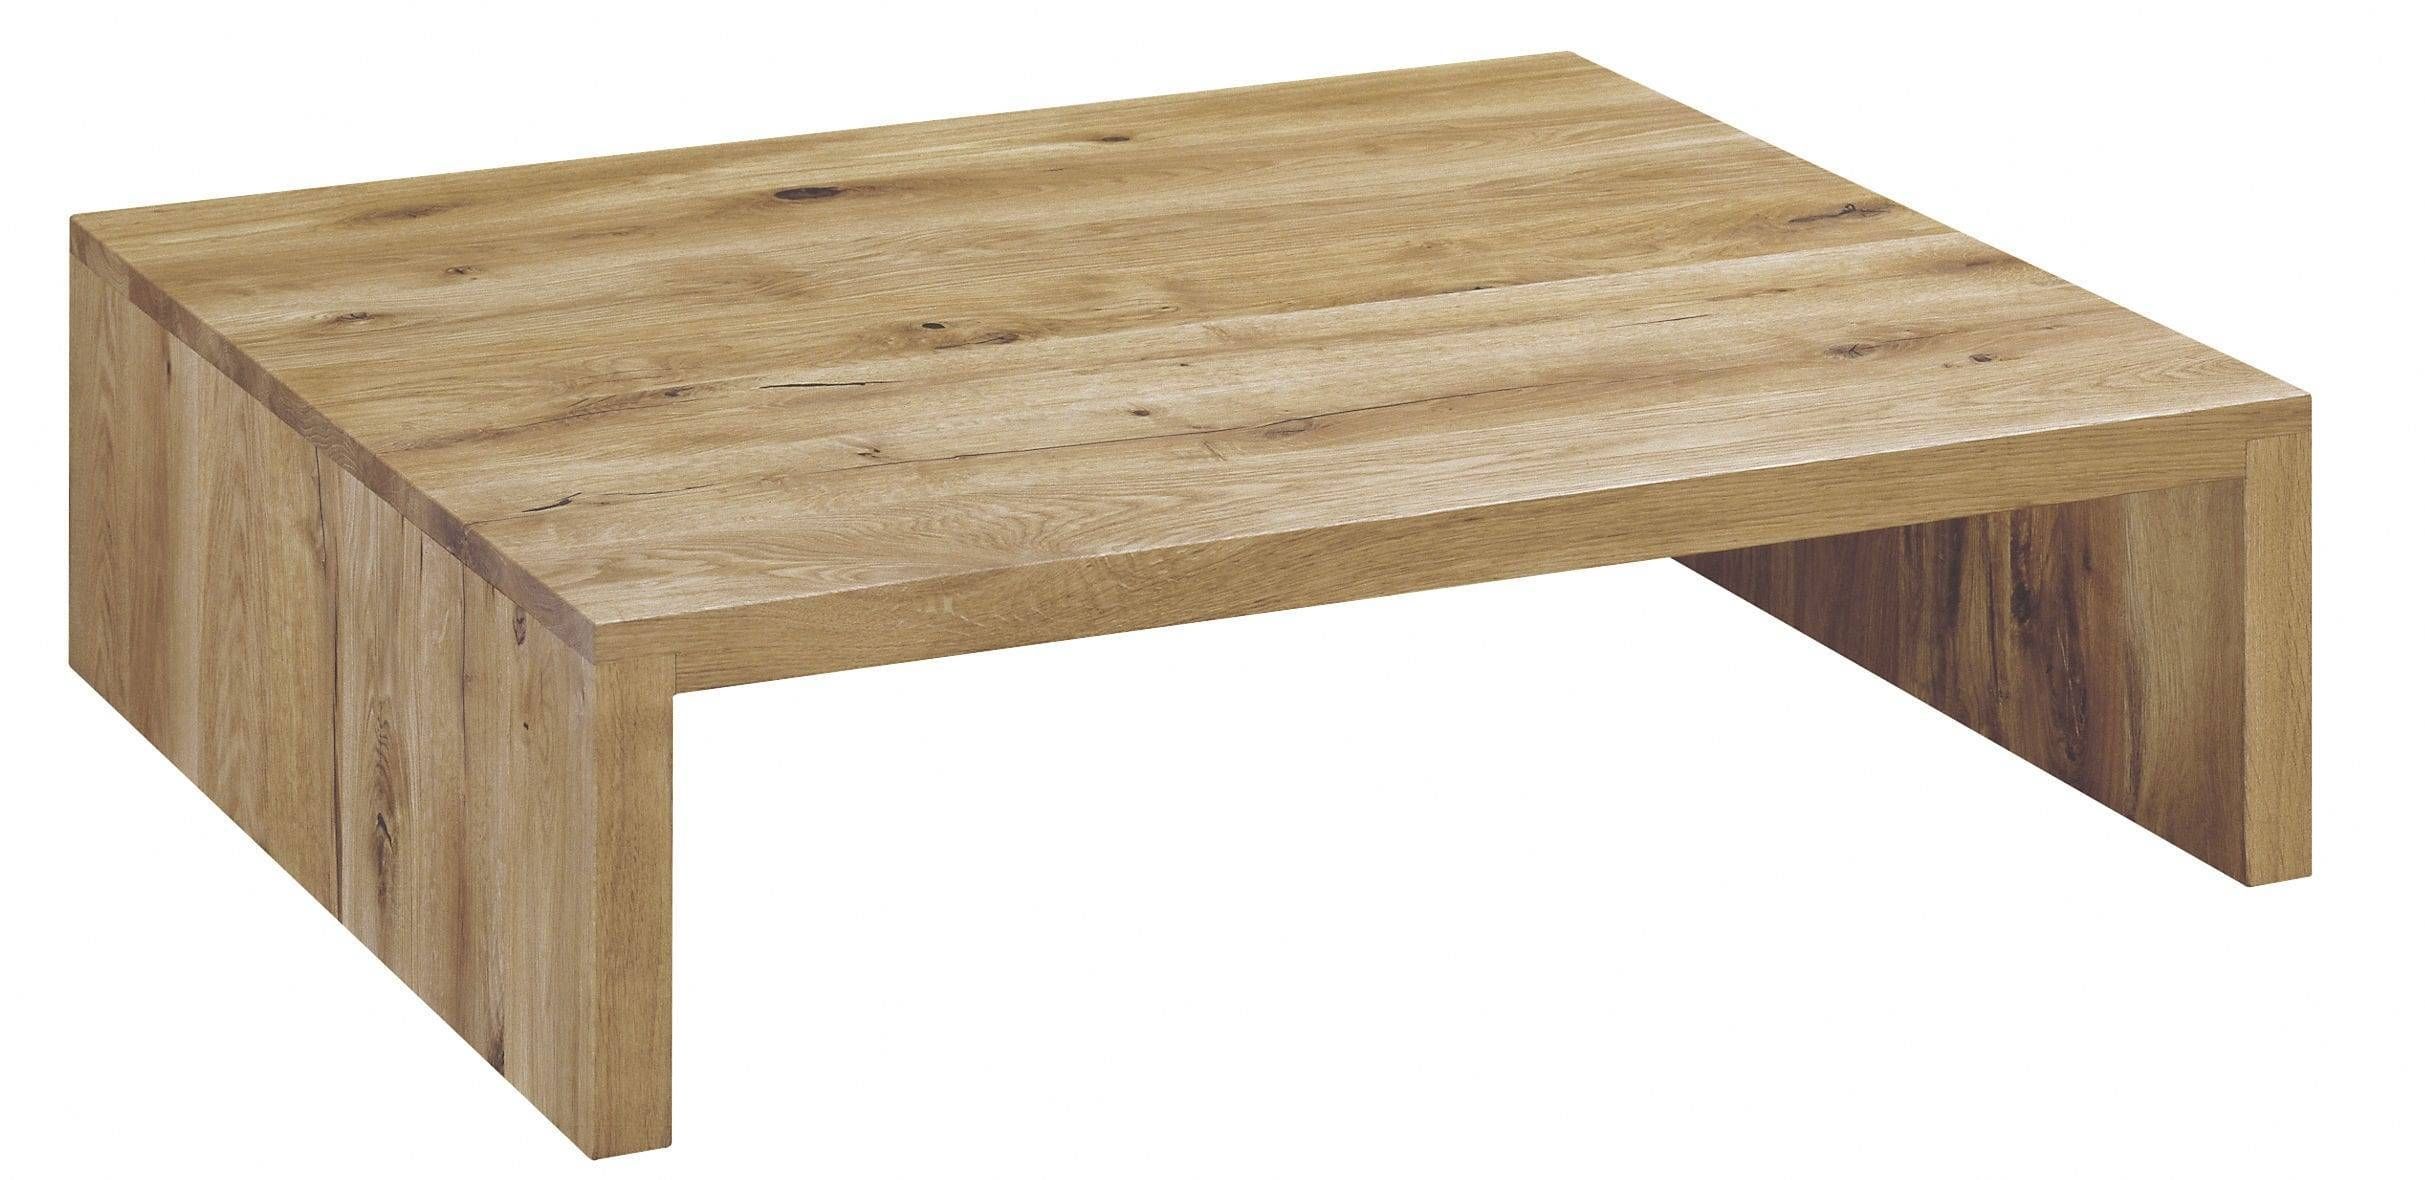 Contemporary Coffee Table / Oak / Oiled Wood / White Oak – Ct01 With Regard To Low Oak Coffee Tables (View 11 of 15)